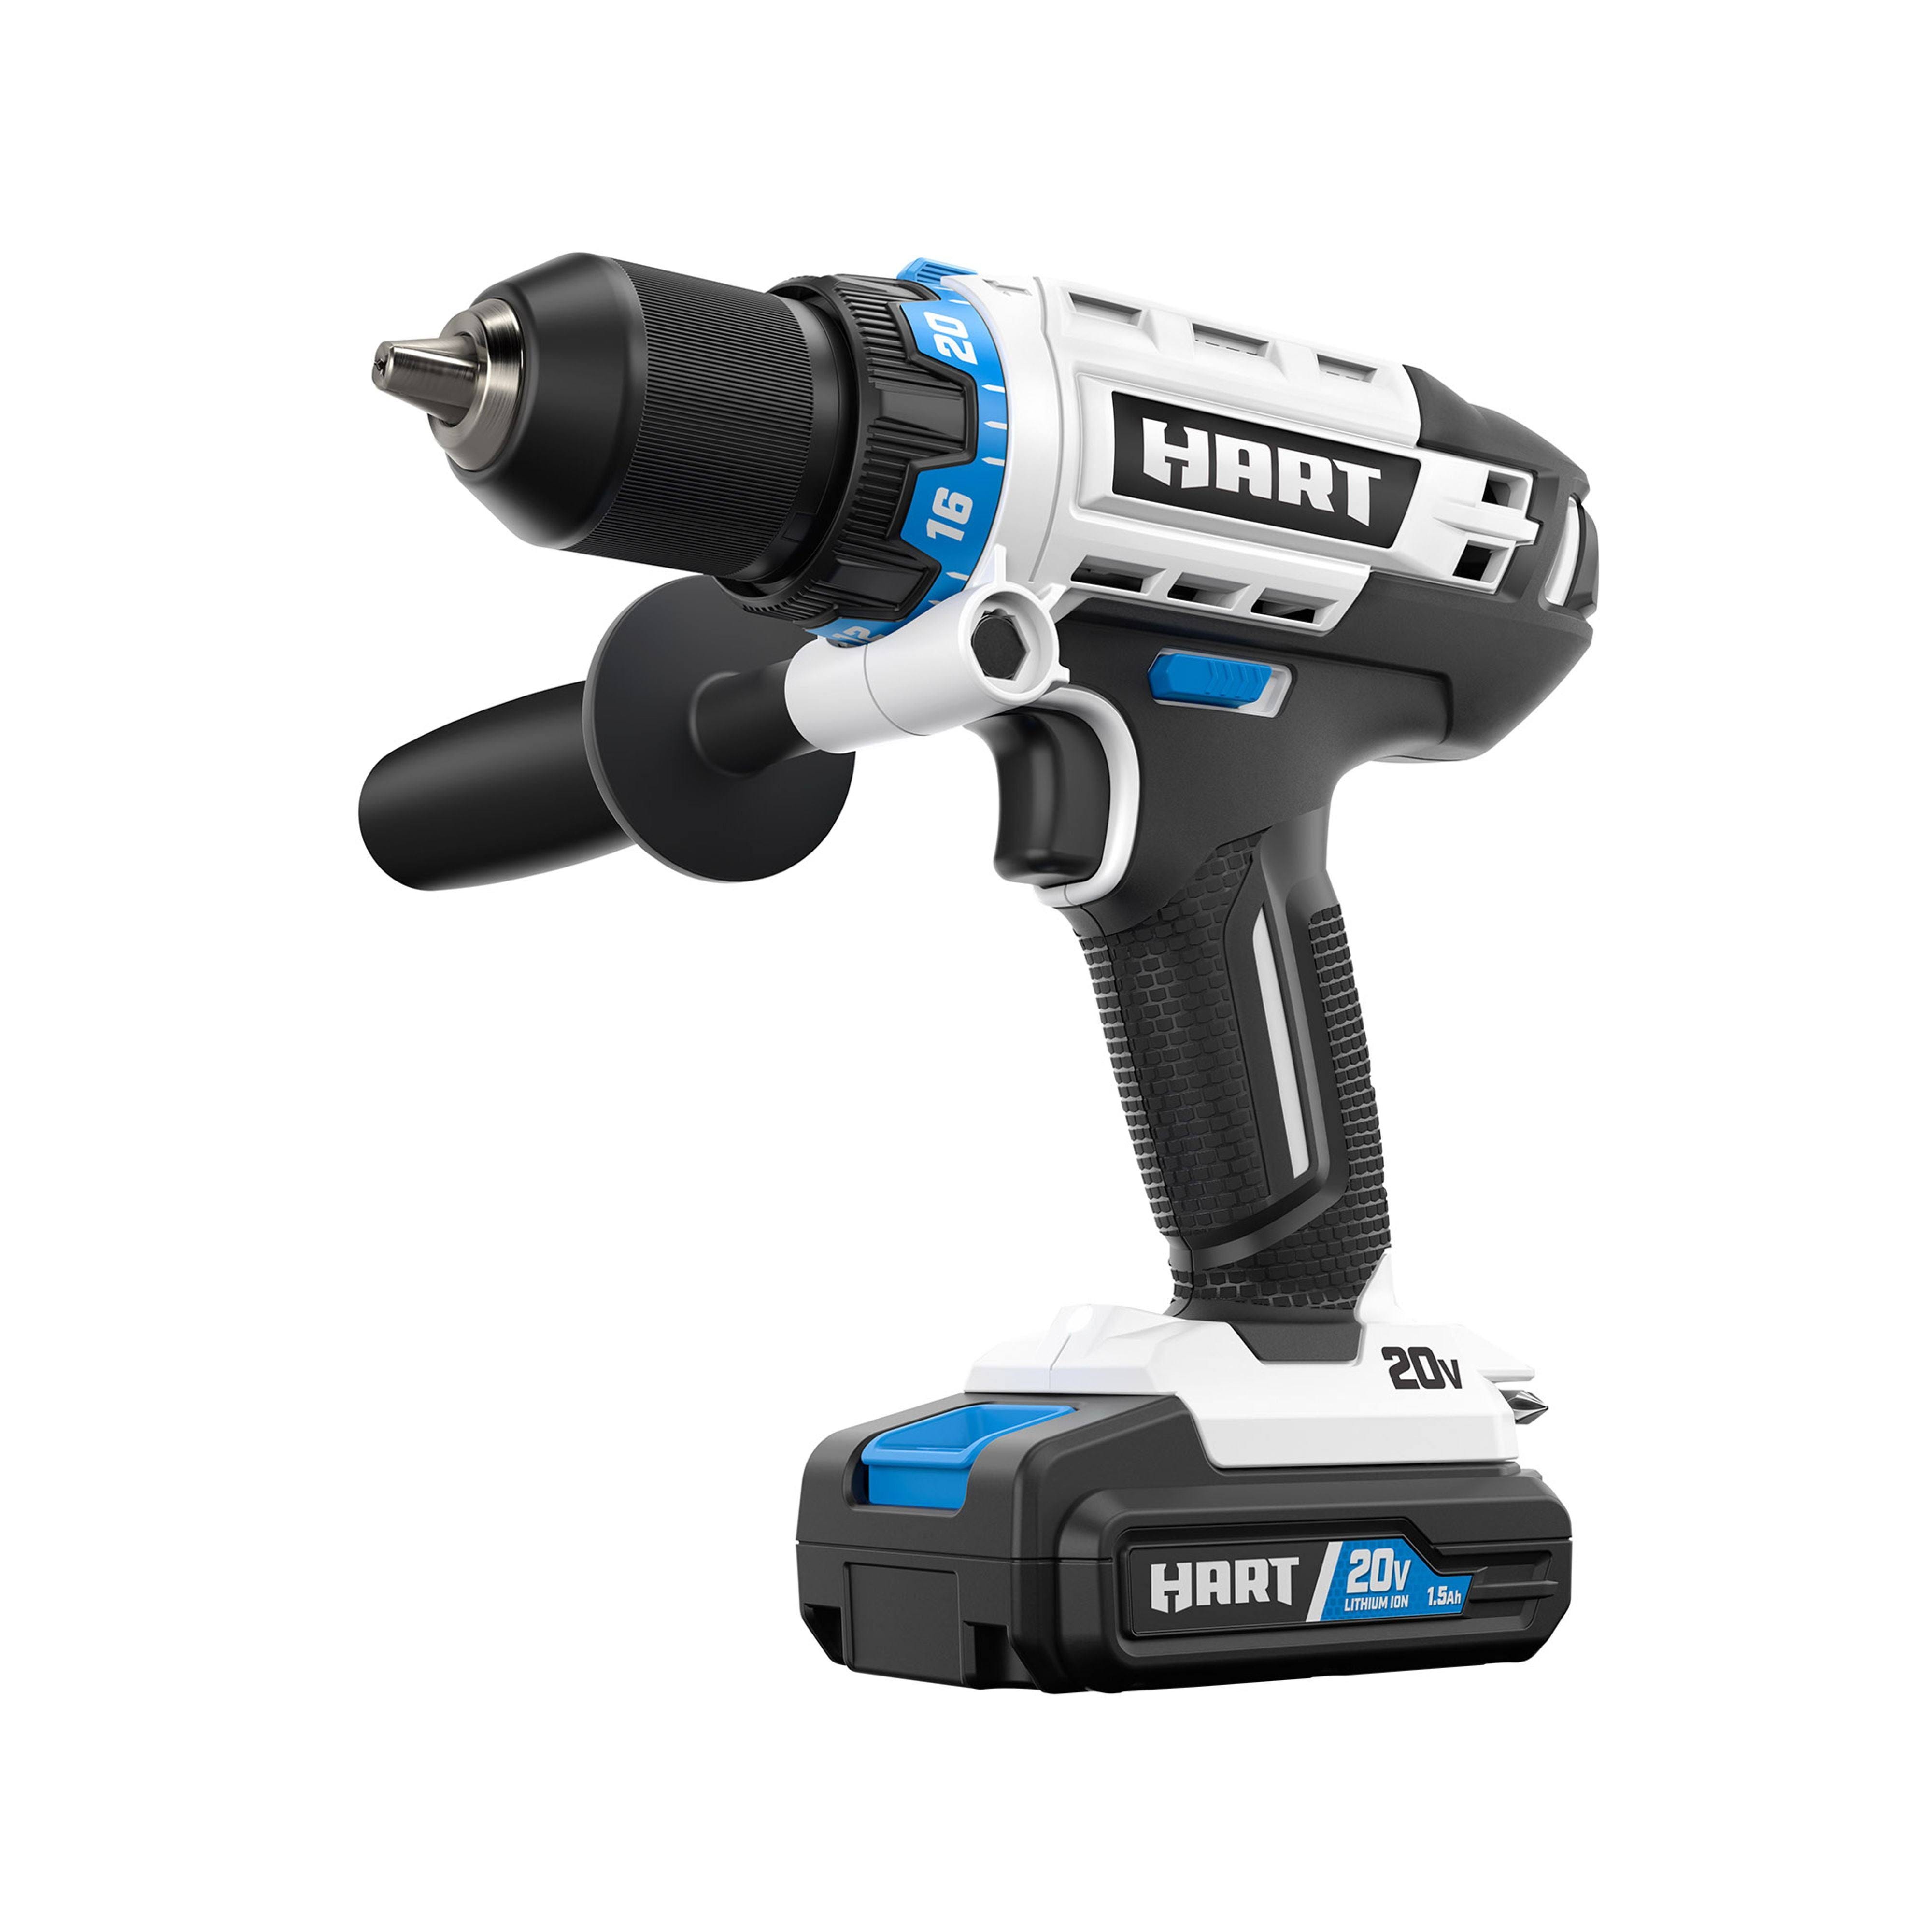 Hart 20V Hammer Drill with LED Work Light and Bit Storage | Image